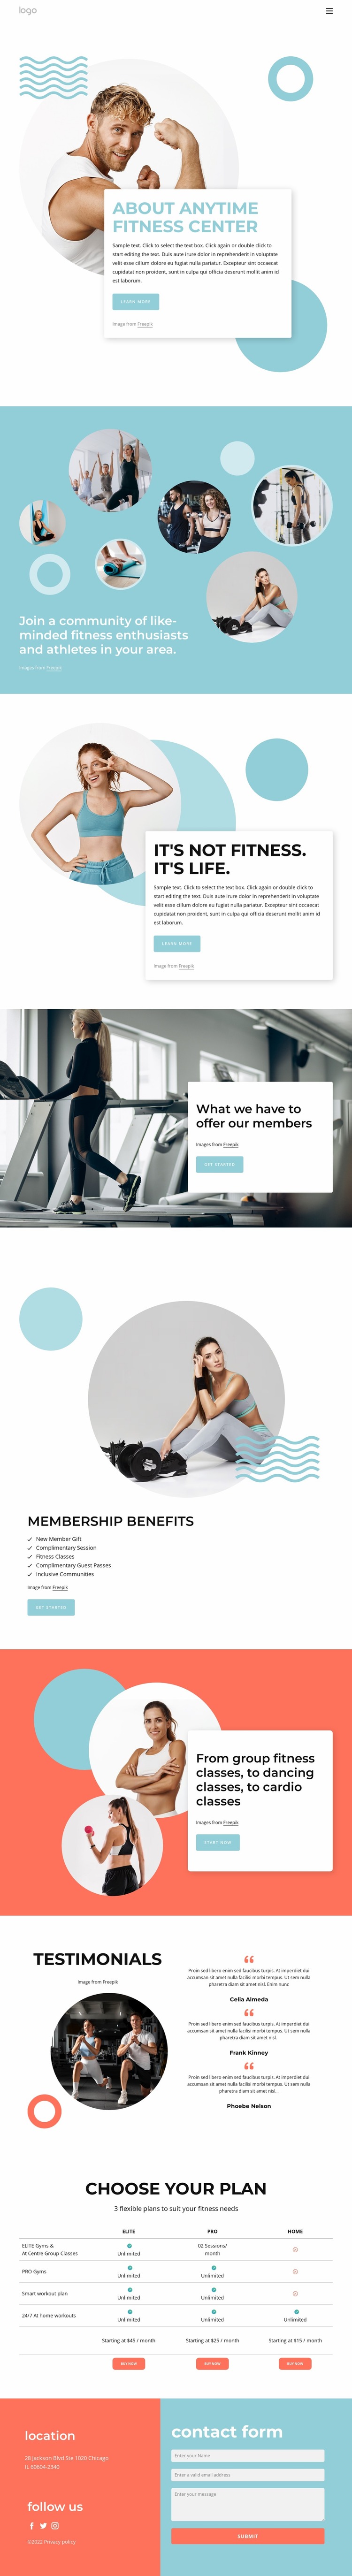 About Anytime fitness center Website Mockup